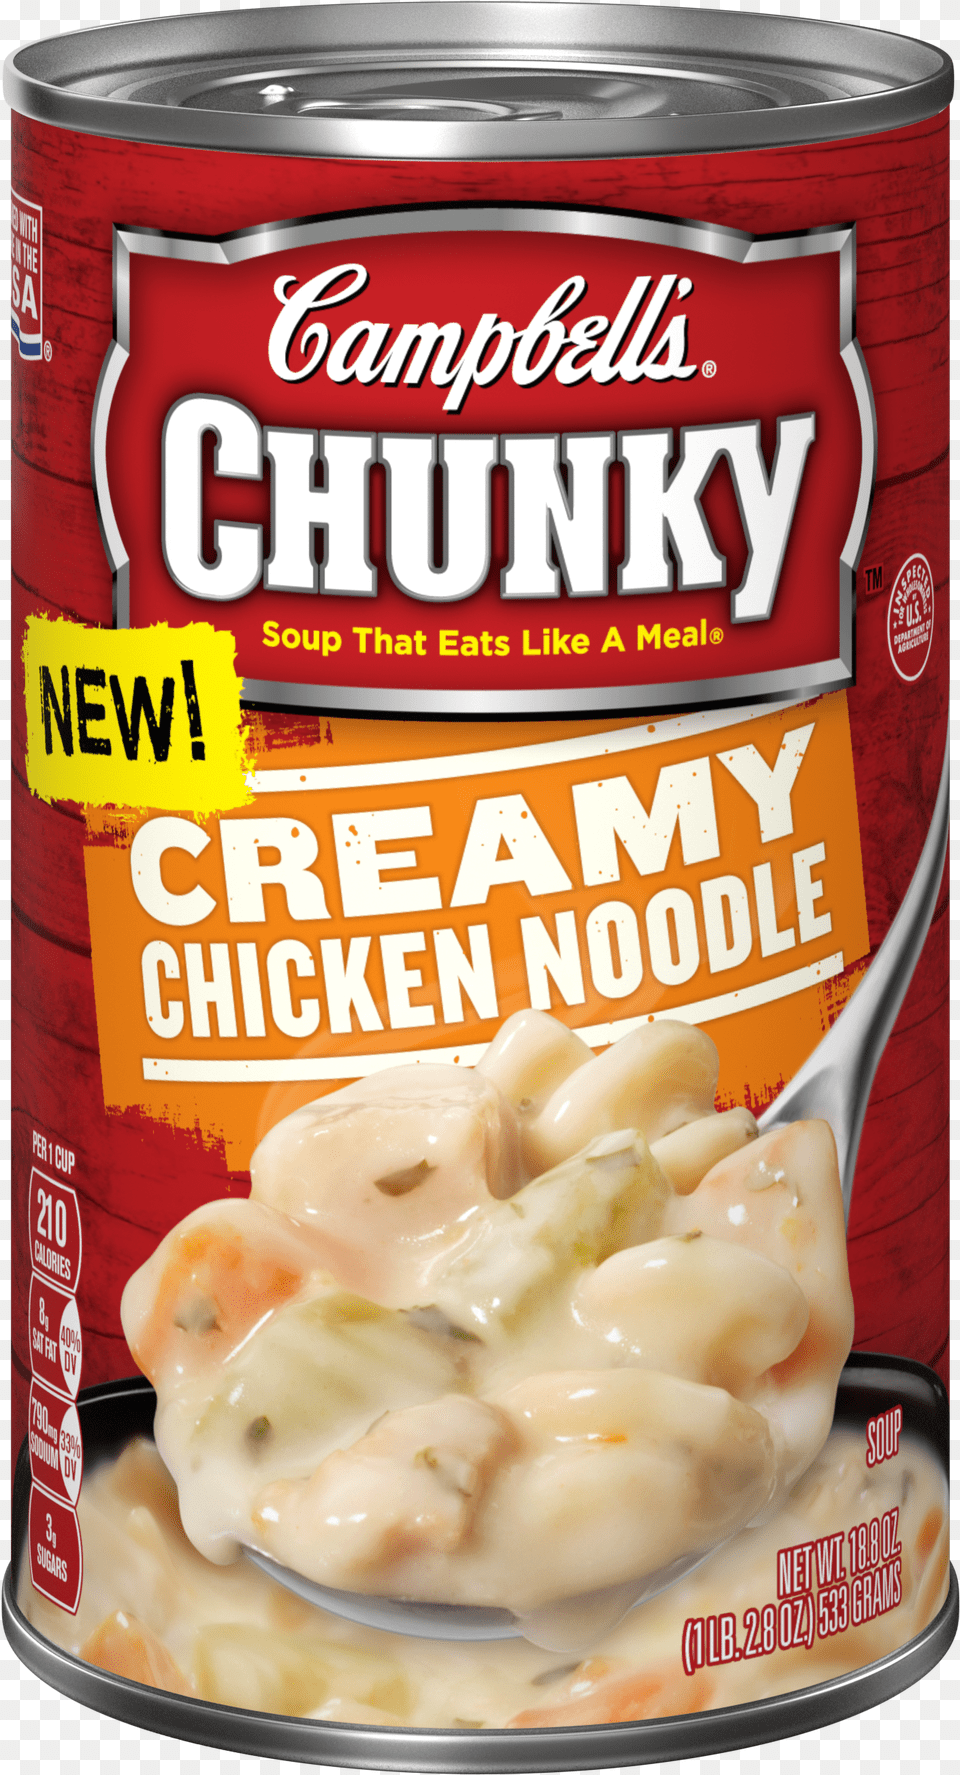 Creamy Chicken Noodle Soup Can Png Image